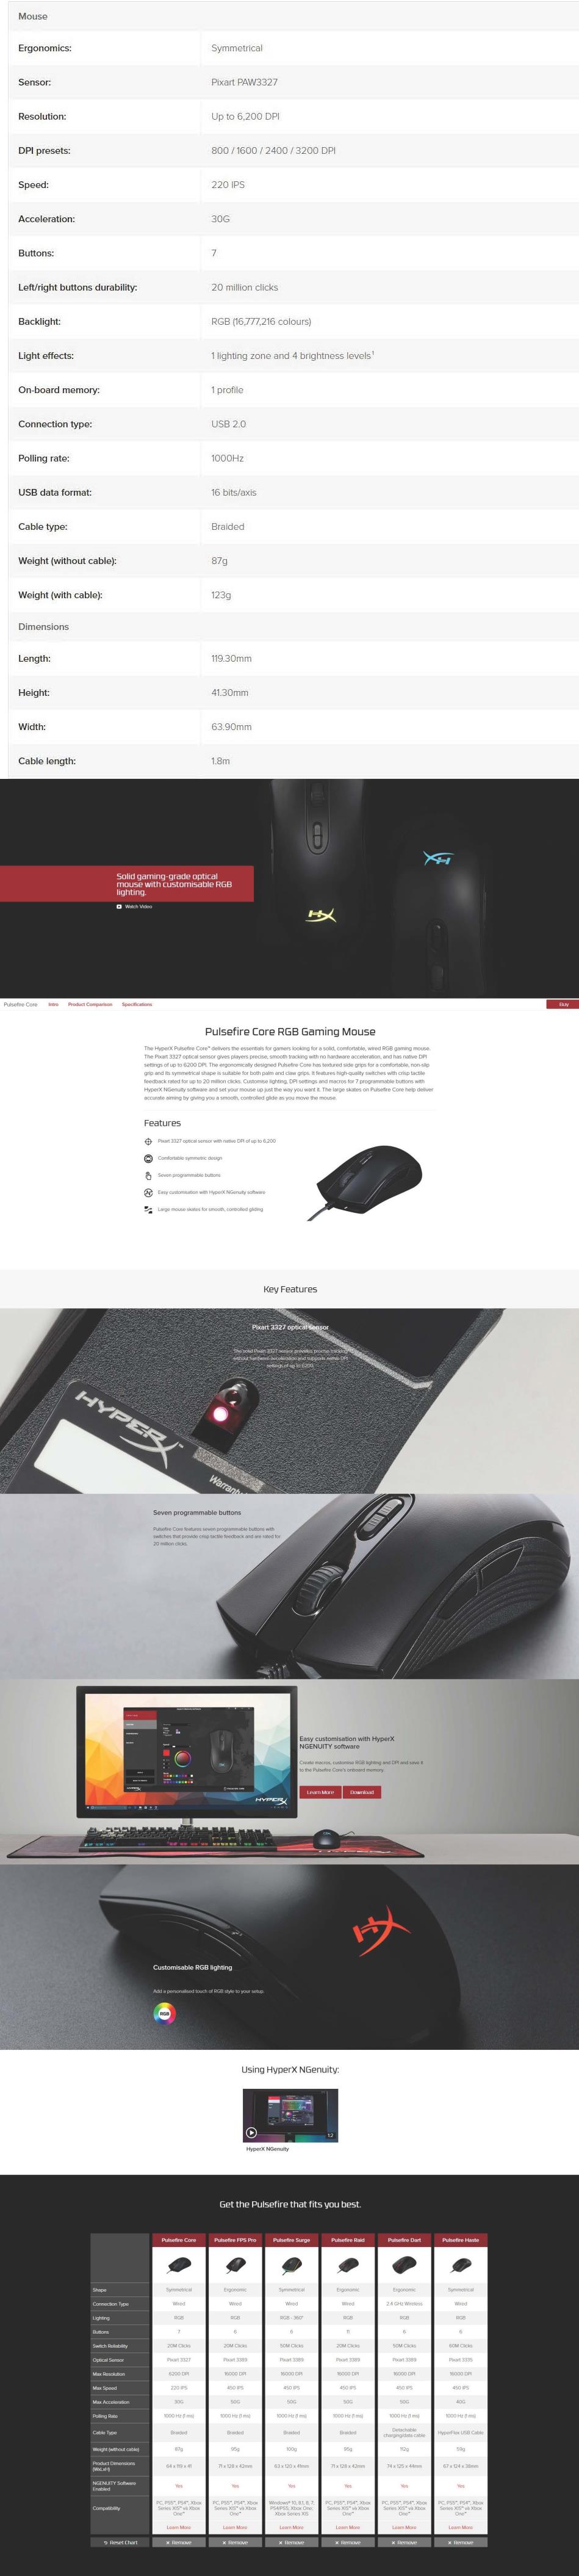 A large marketing image providing additional information about the product HyperX Pulsefire Core - Wired Gaming Mouse (Black) - Additional alt info not provided